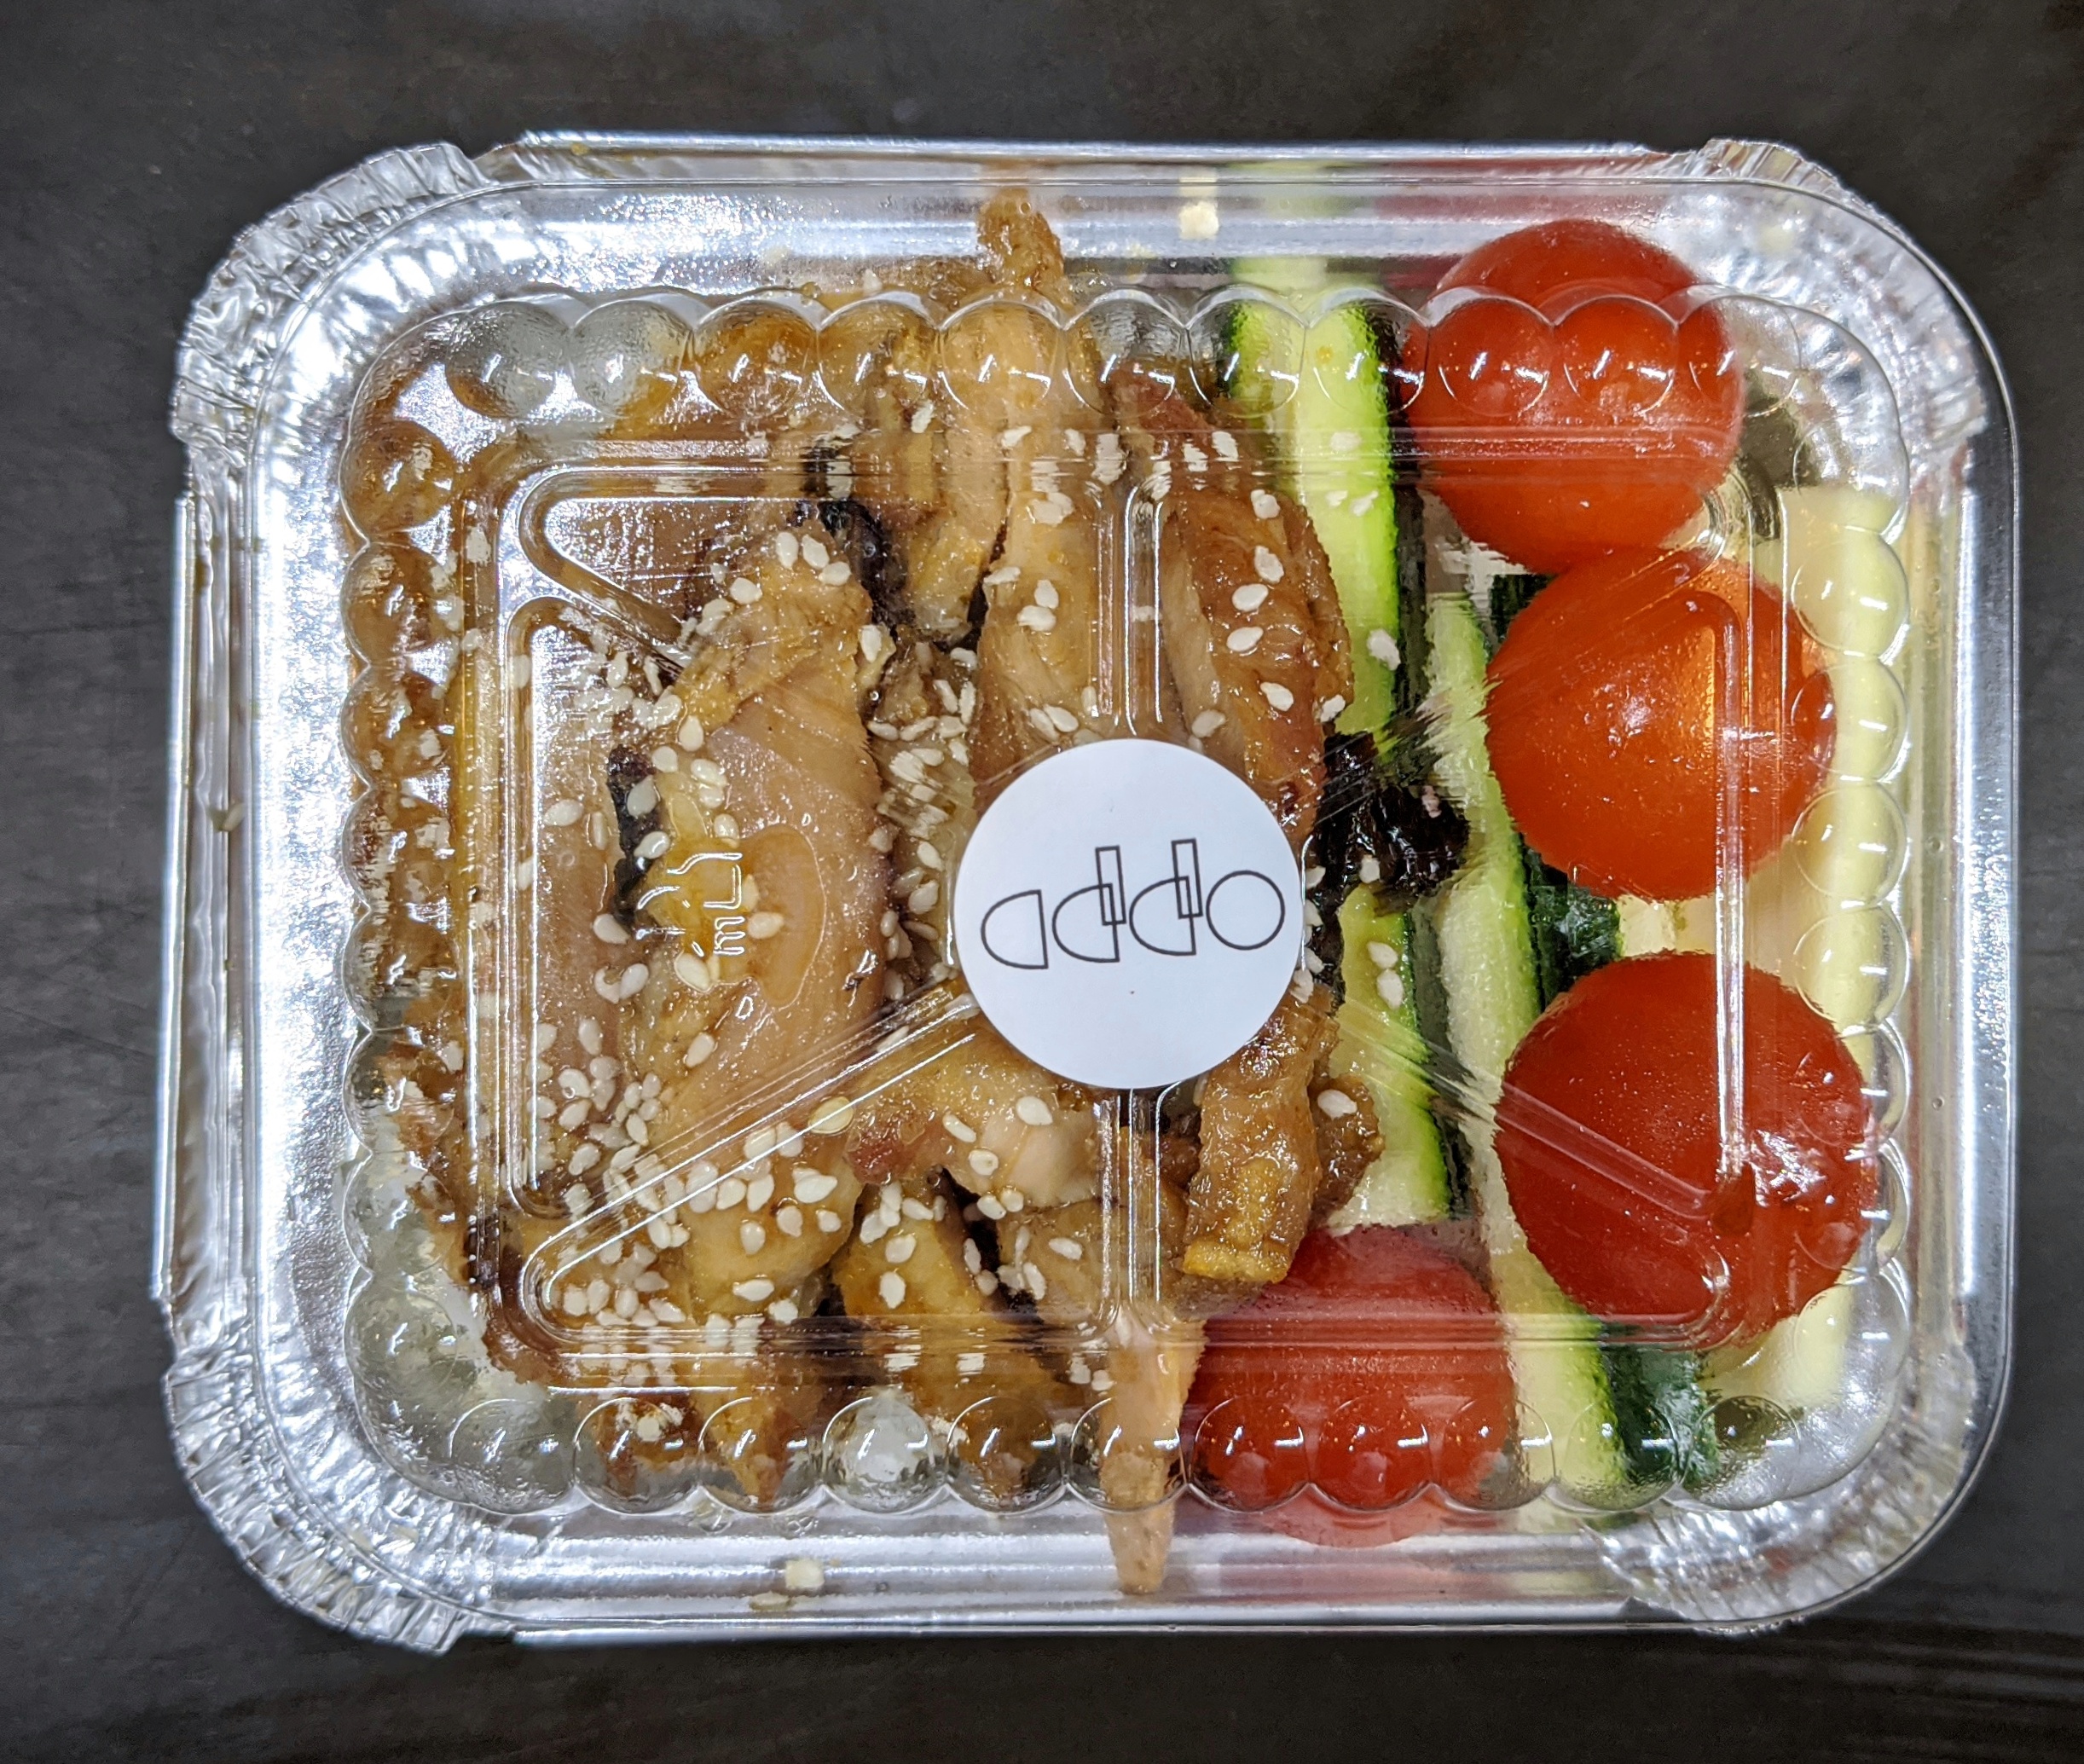 A takeout container with chicken teriyaki, cucumbers, and tomatoes, and a label that says Addo